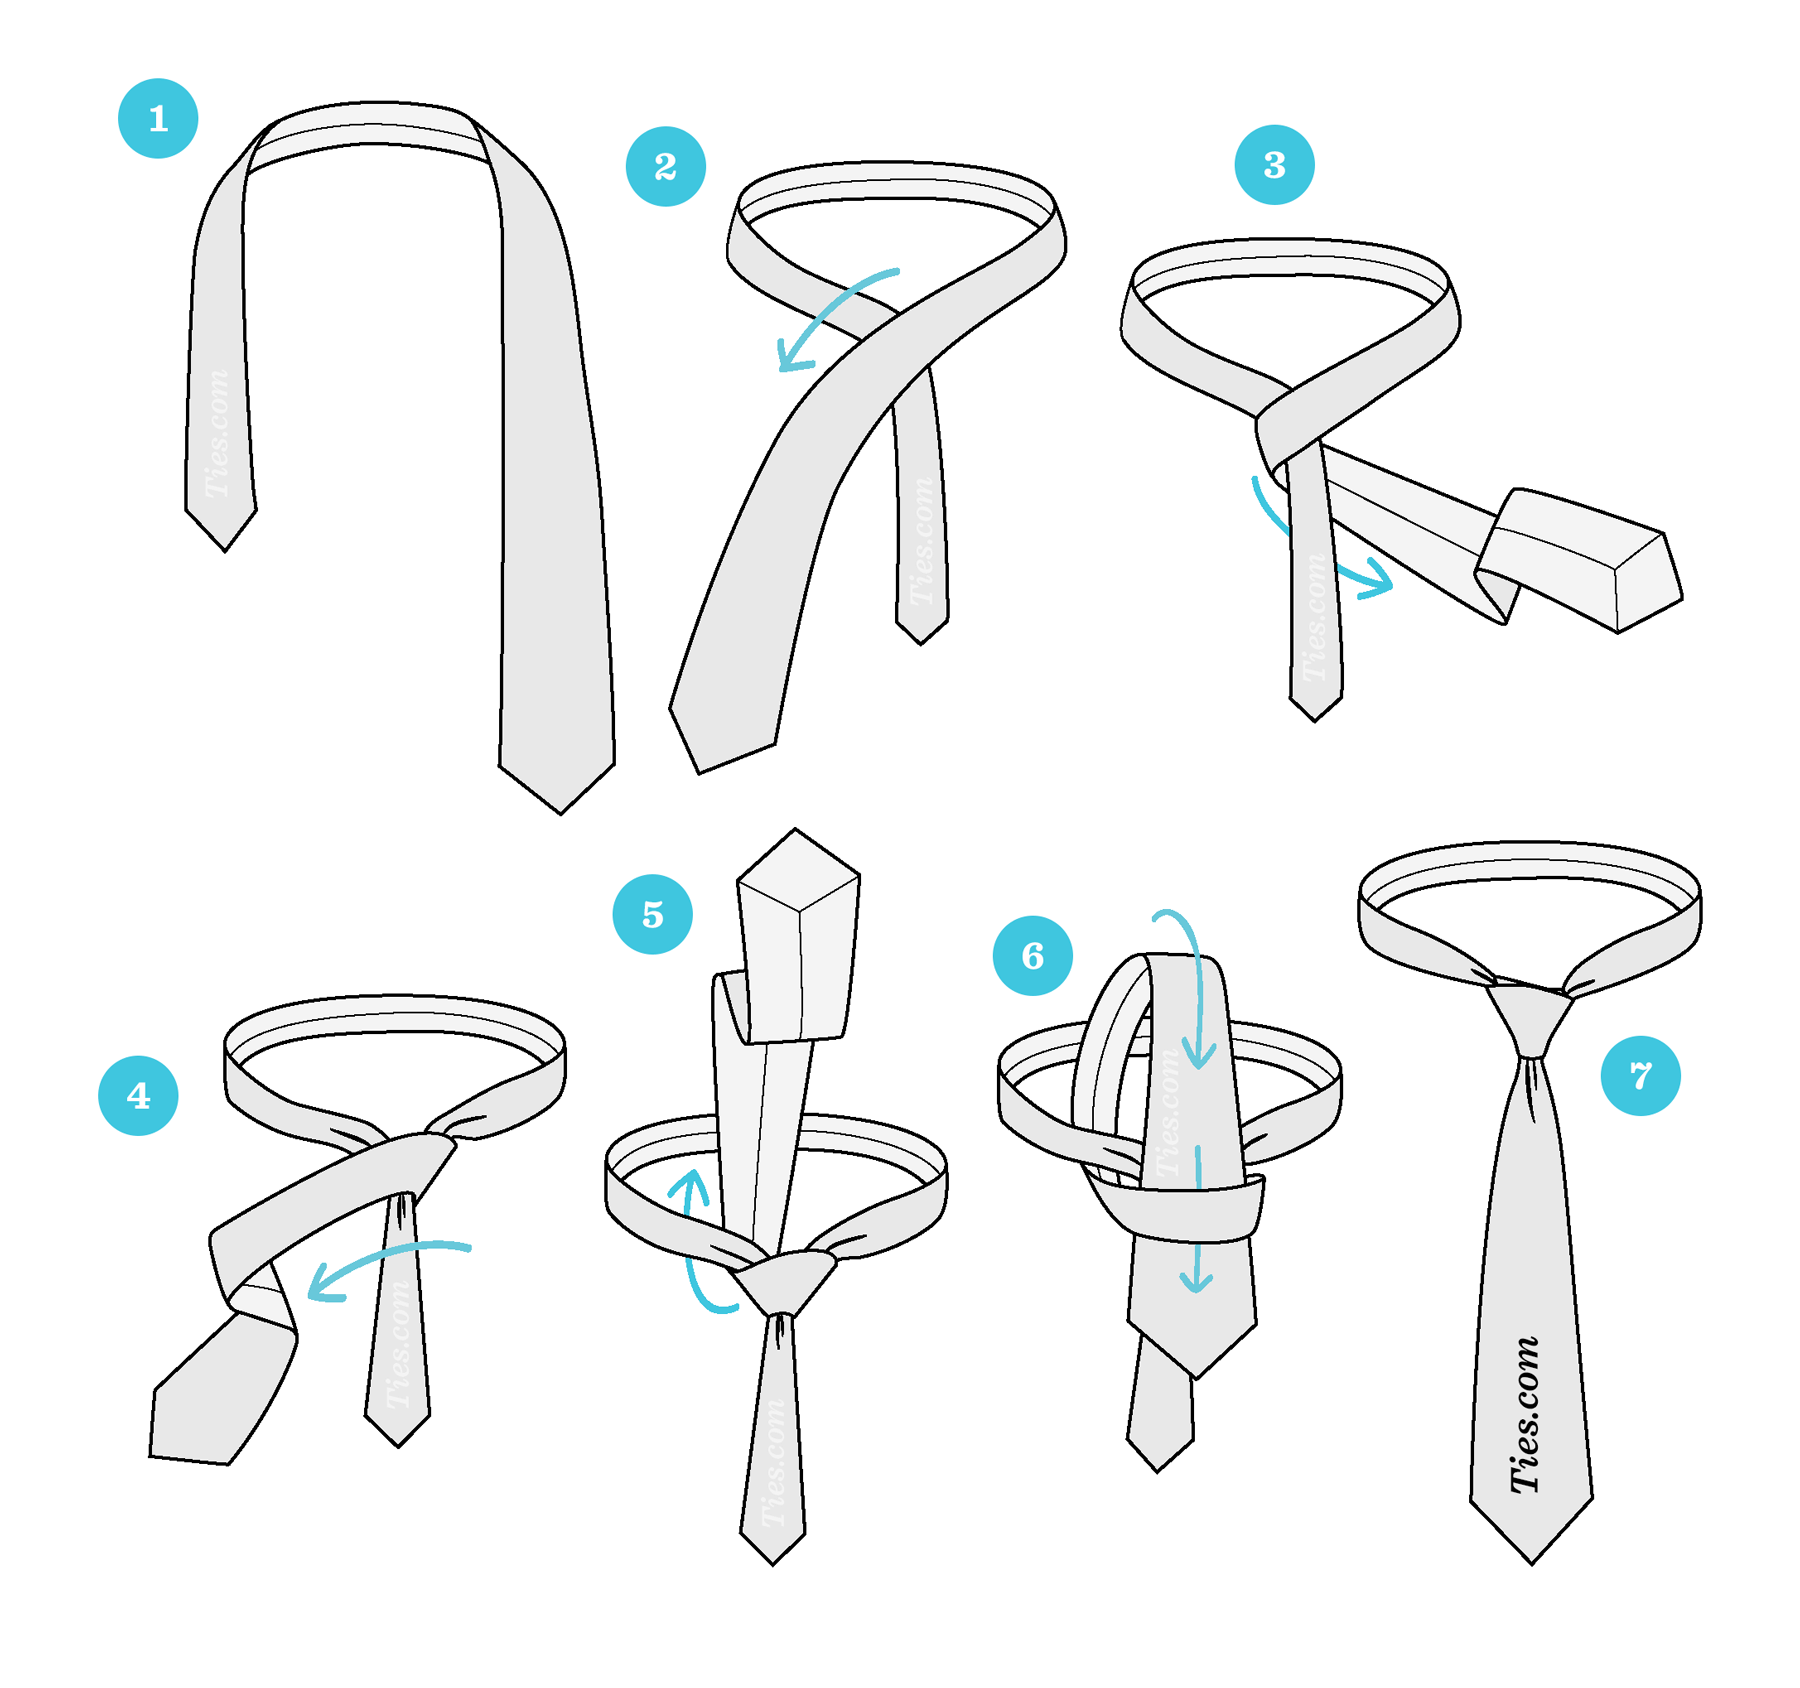 How To Tie A Tie Easy Steps : How To Tie a Simple Knot | Tie Knot ...